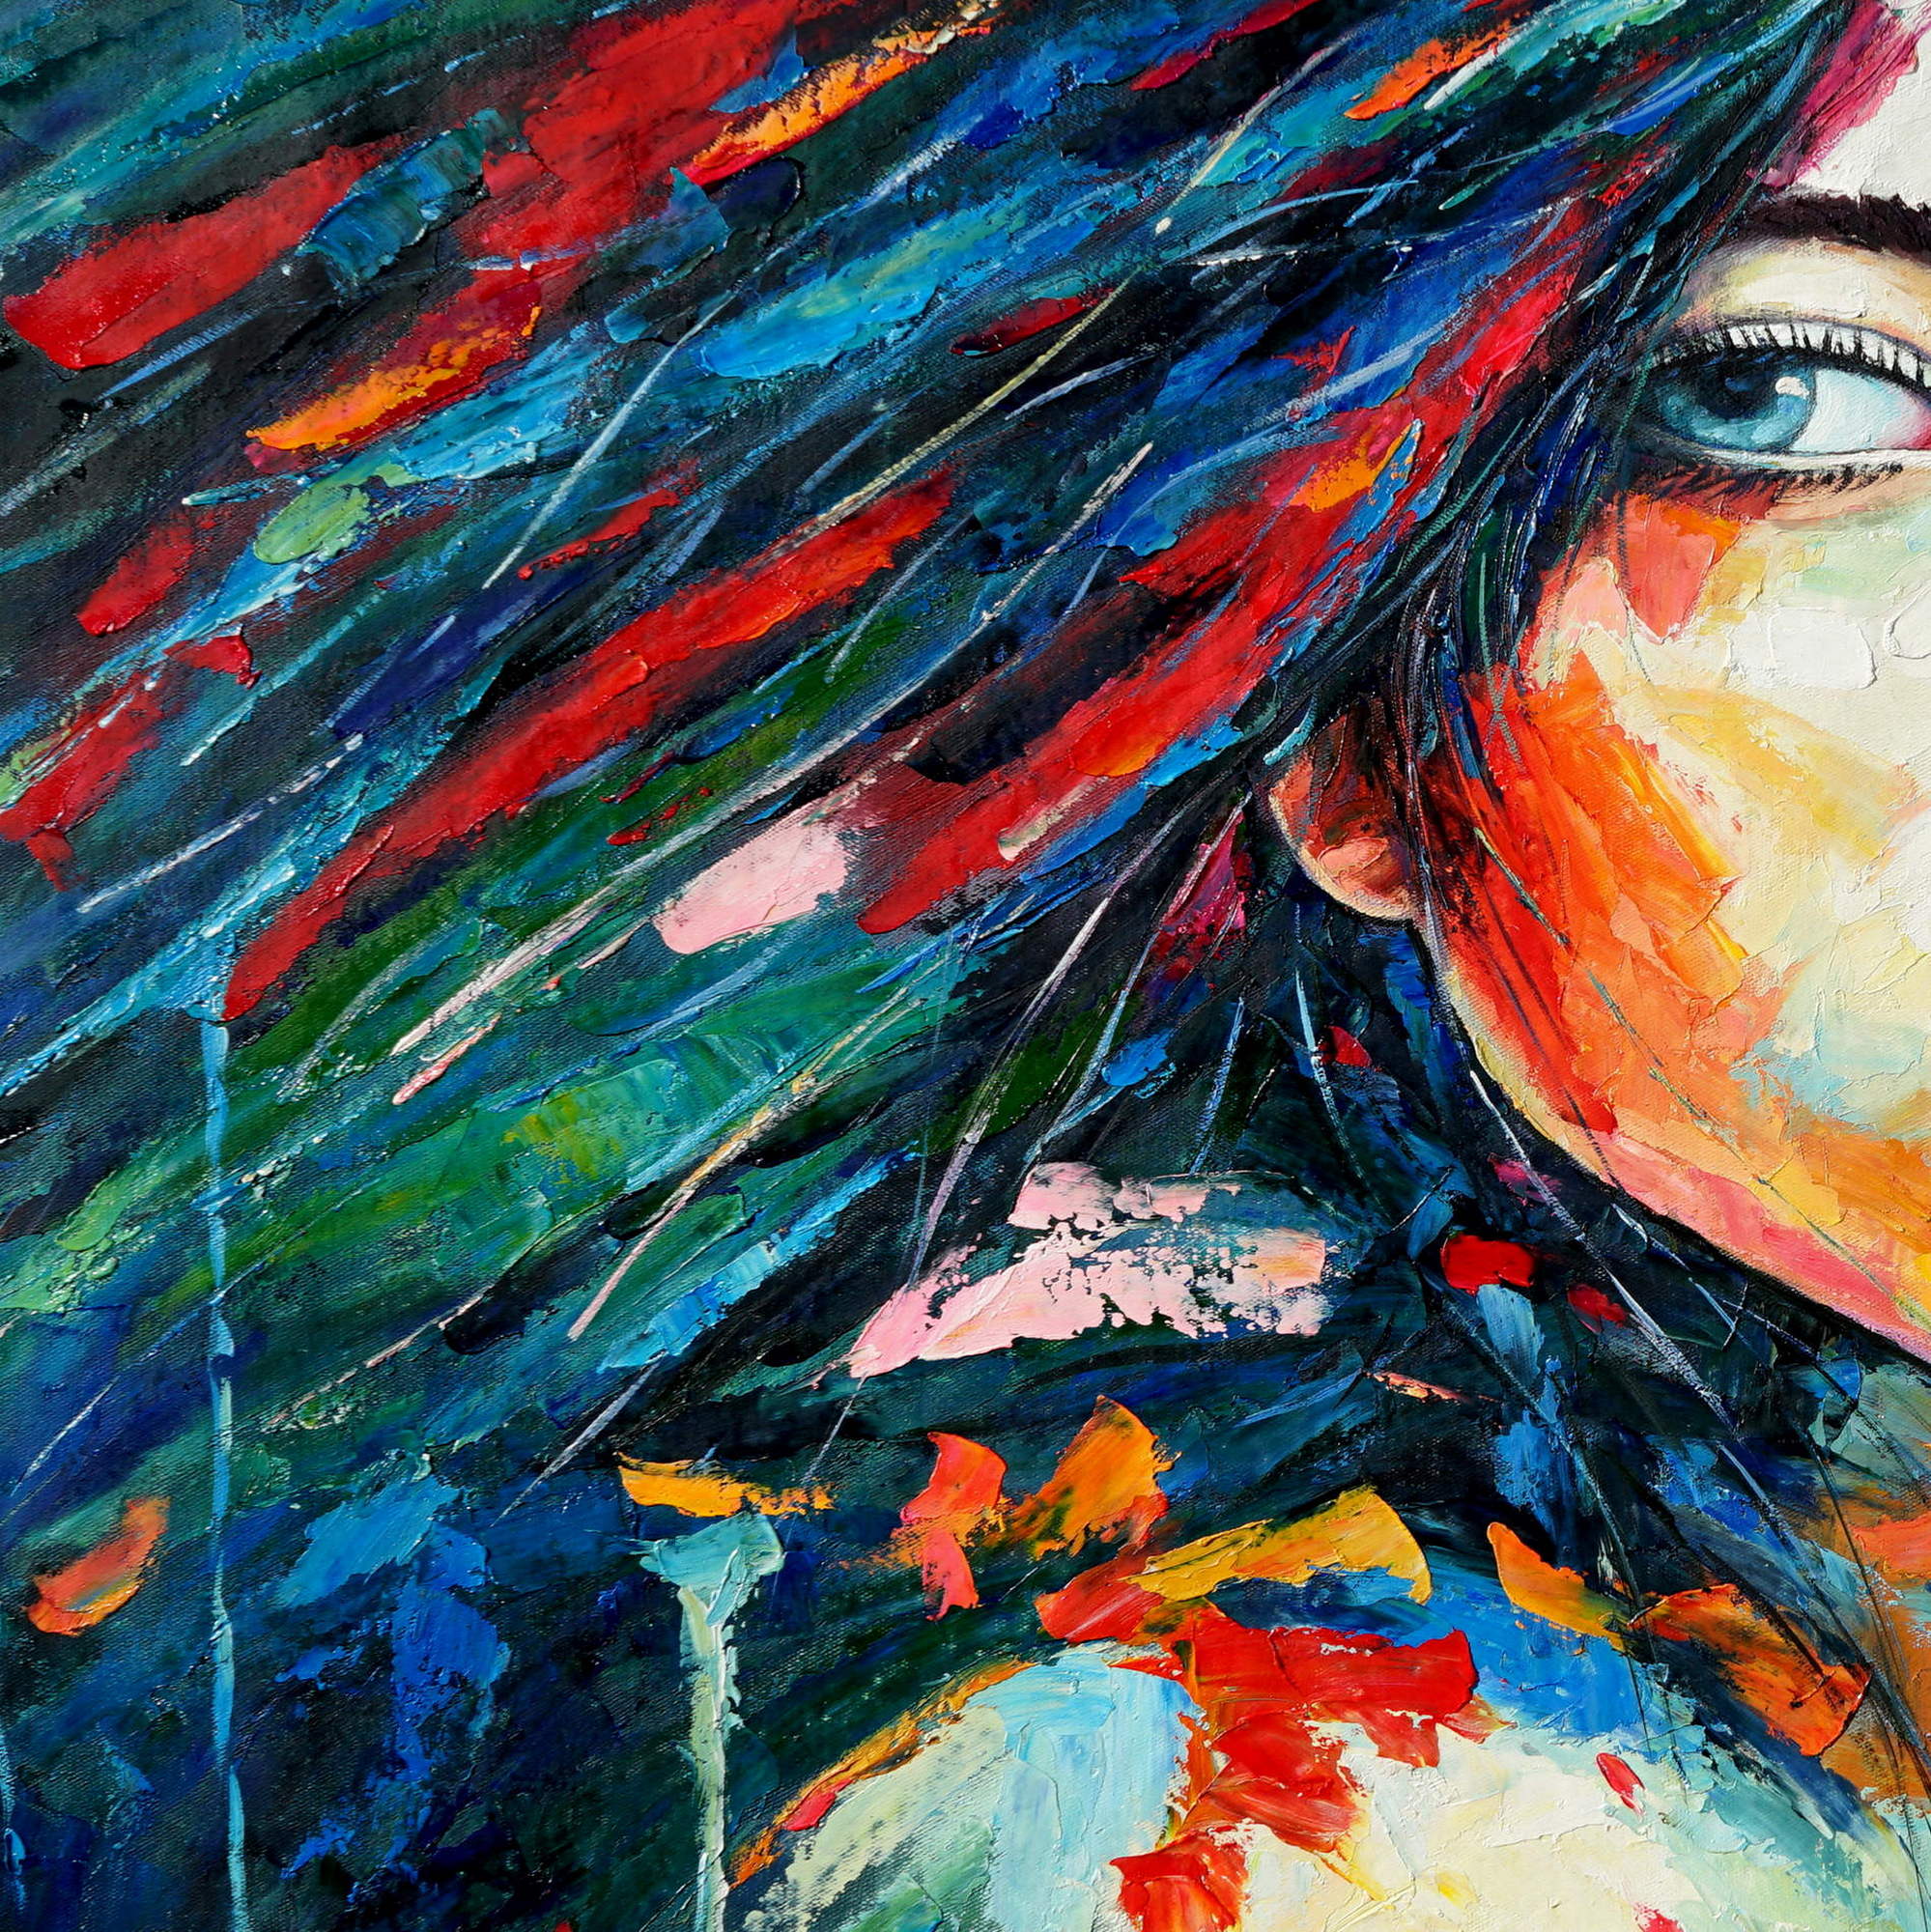 Hand painted Abstract Woman Portrait 60x120cm